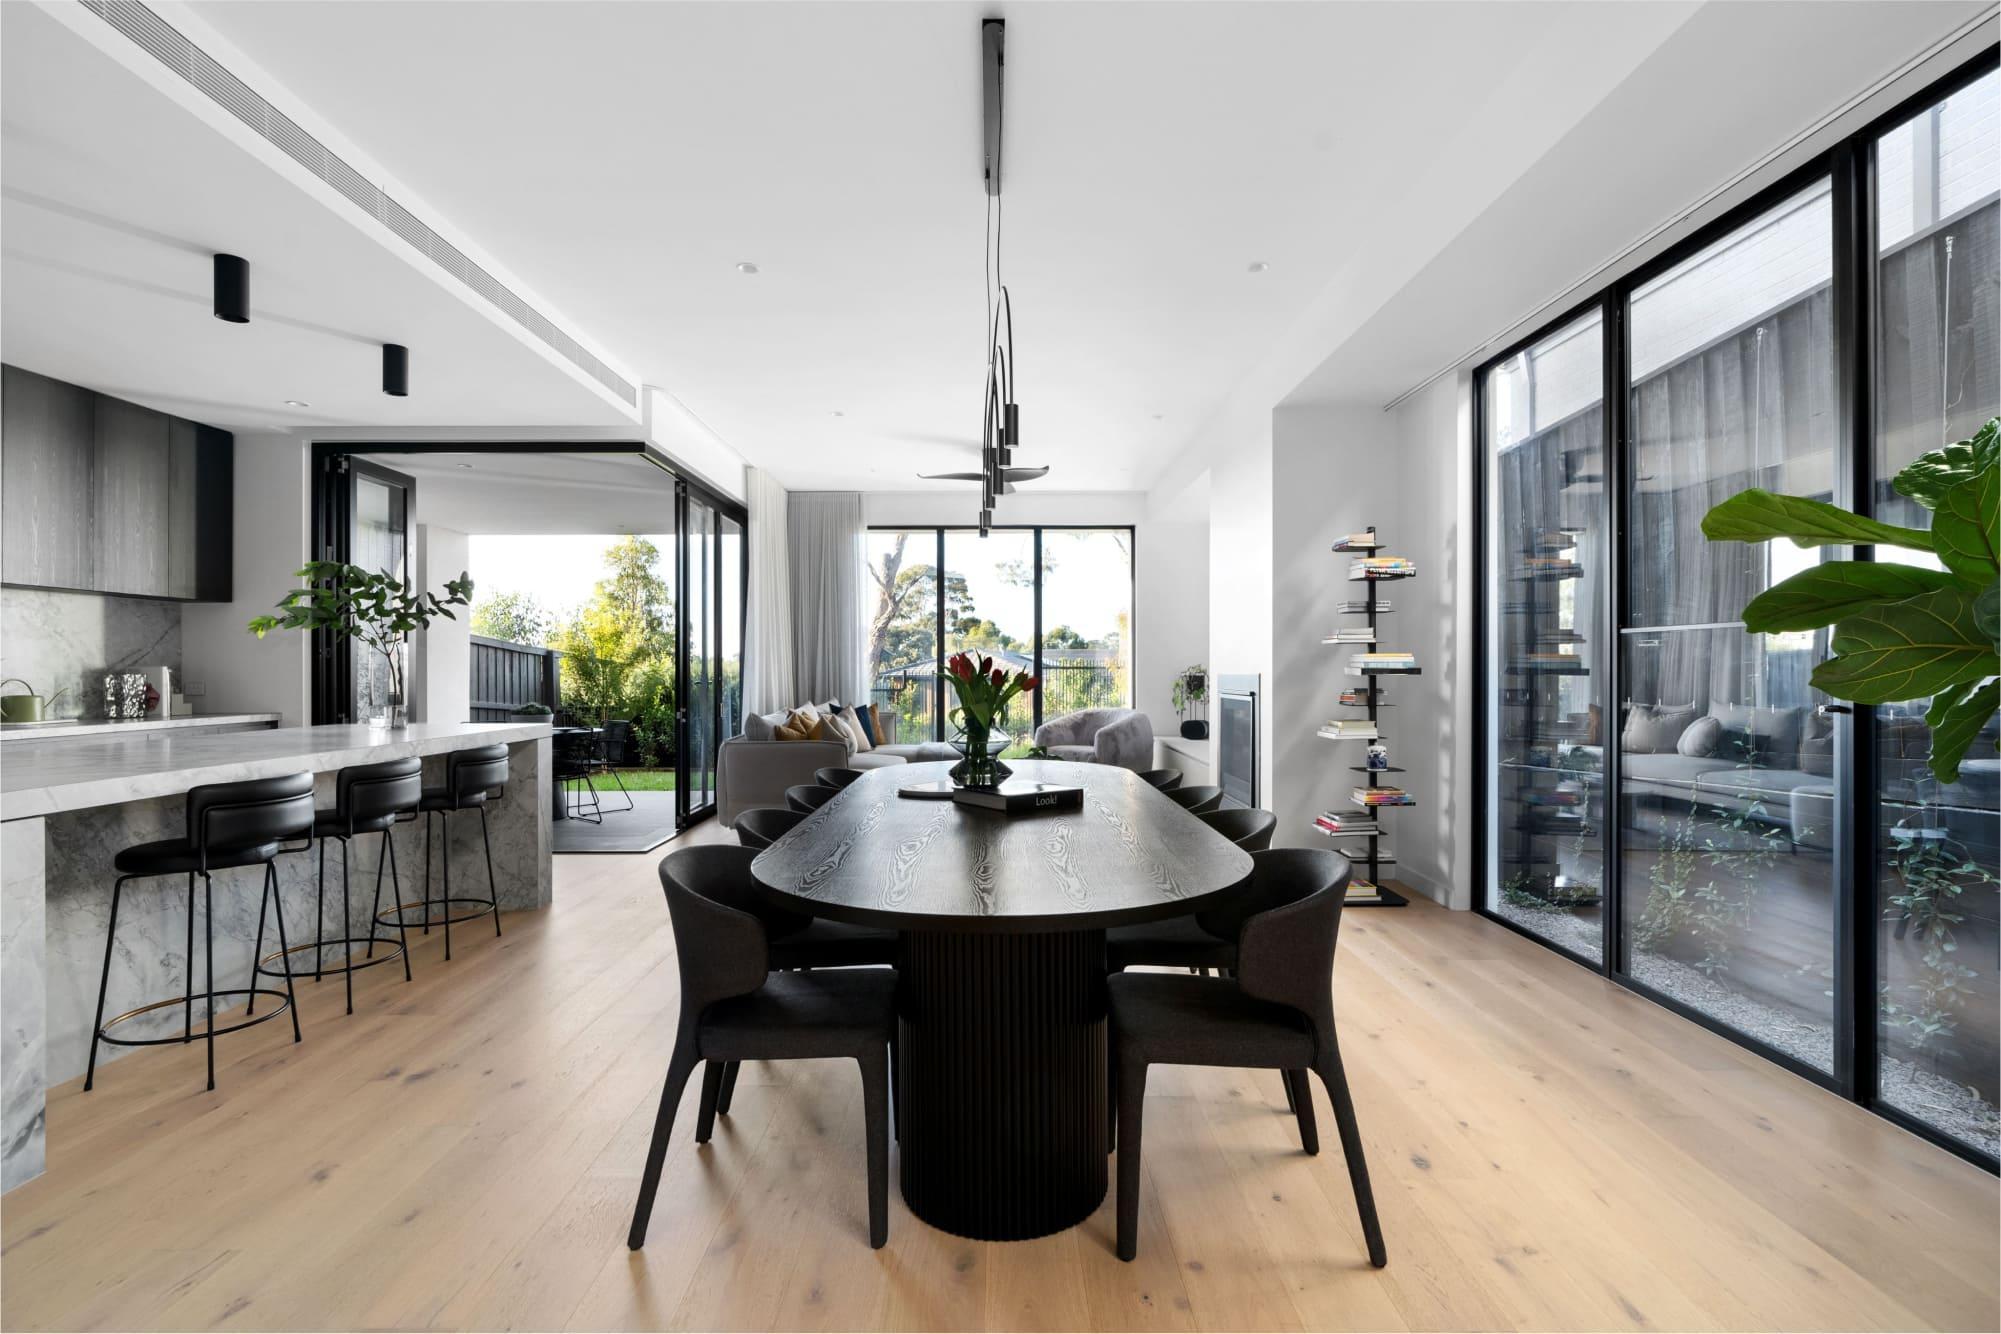 A modern open plan kitchen and dining with expansive windows